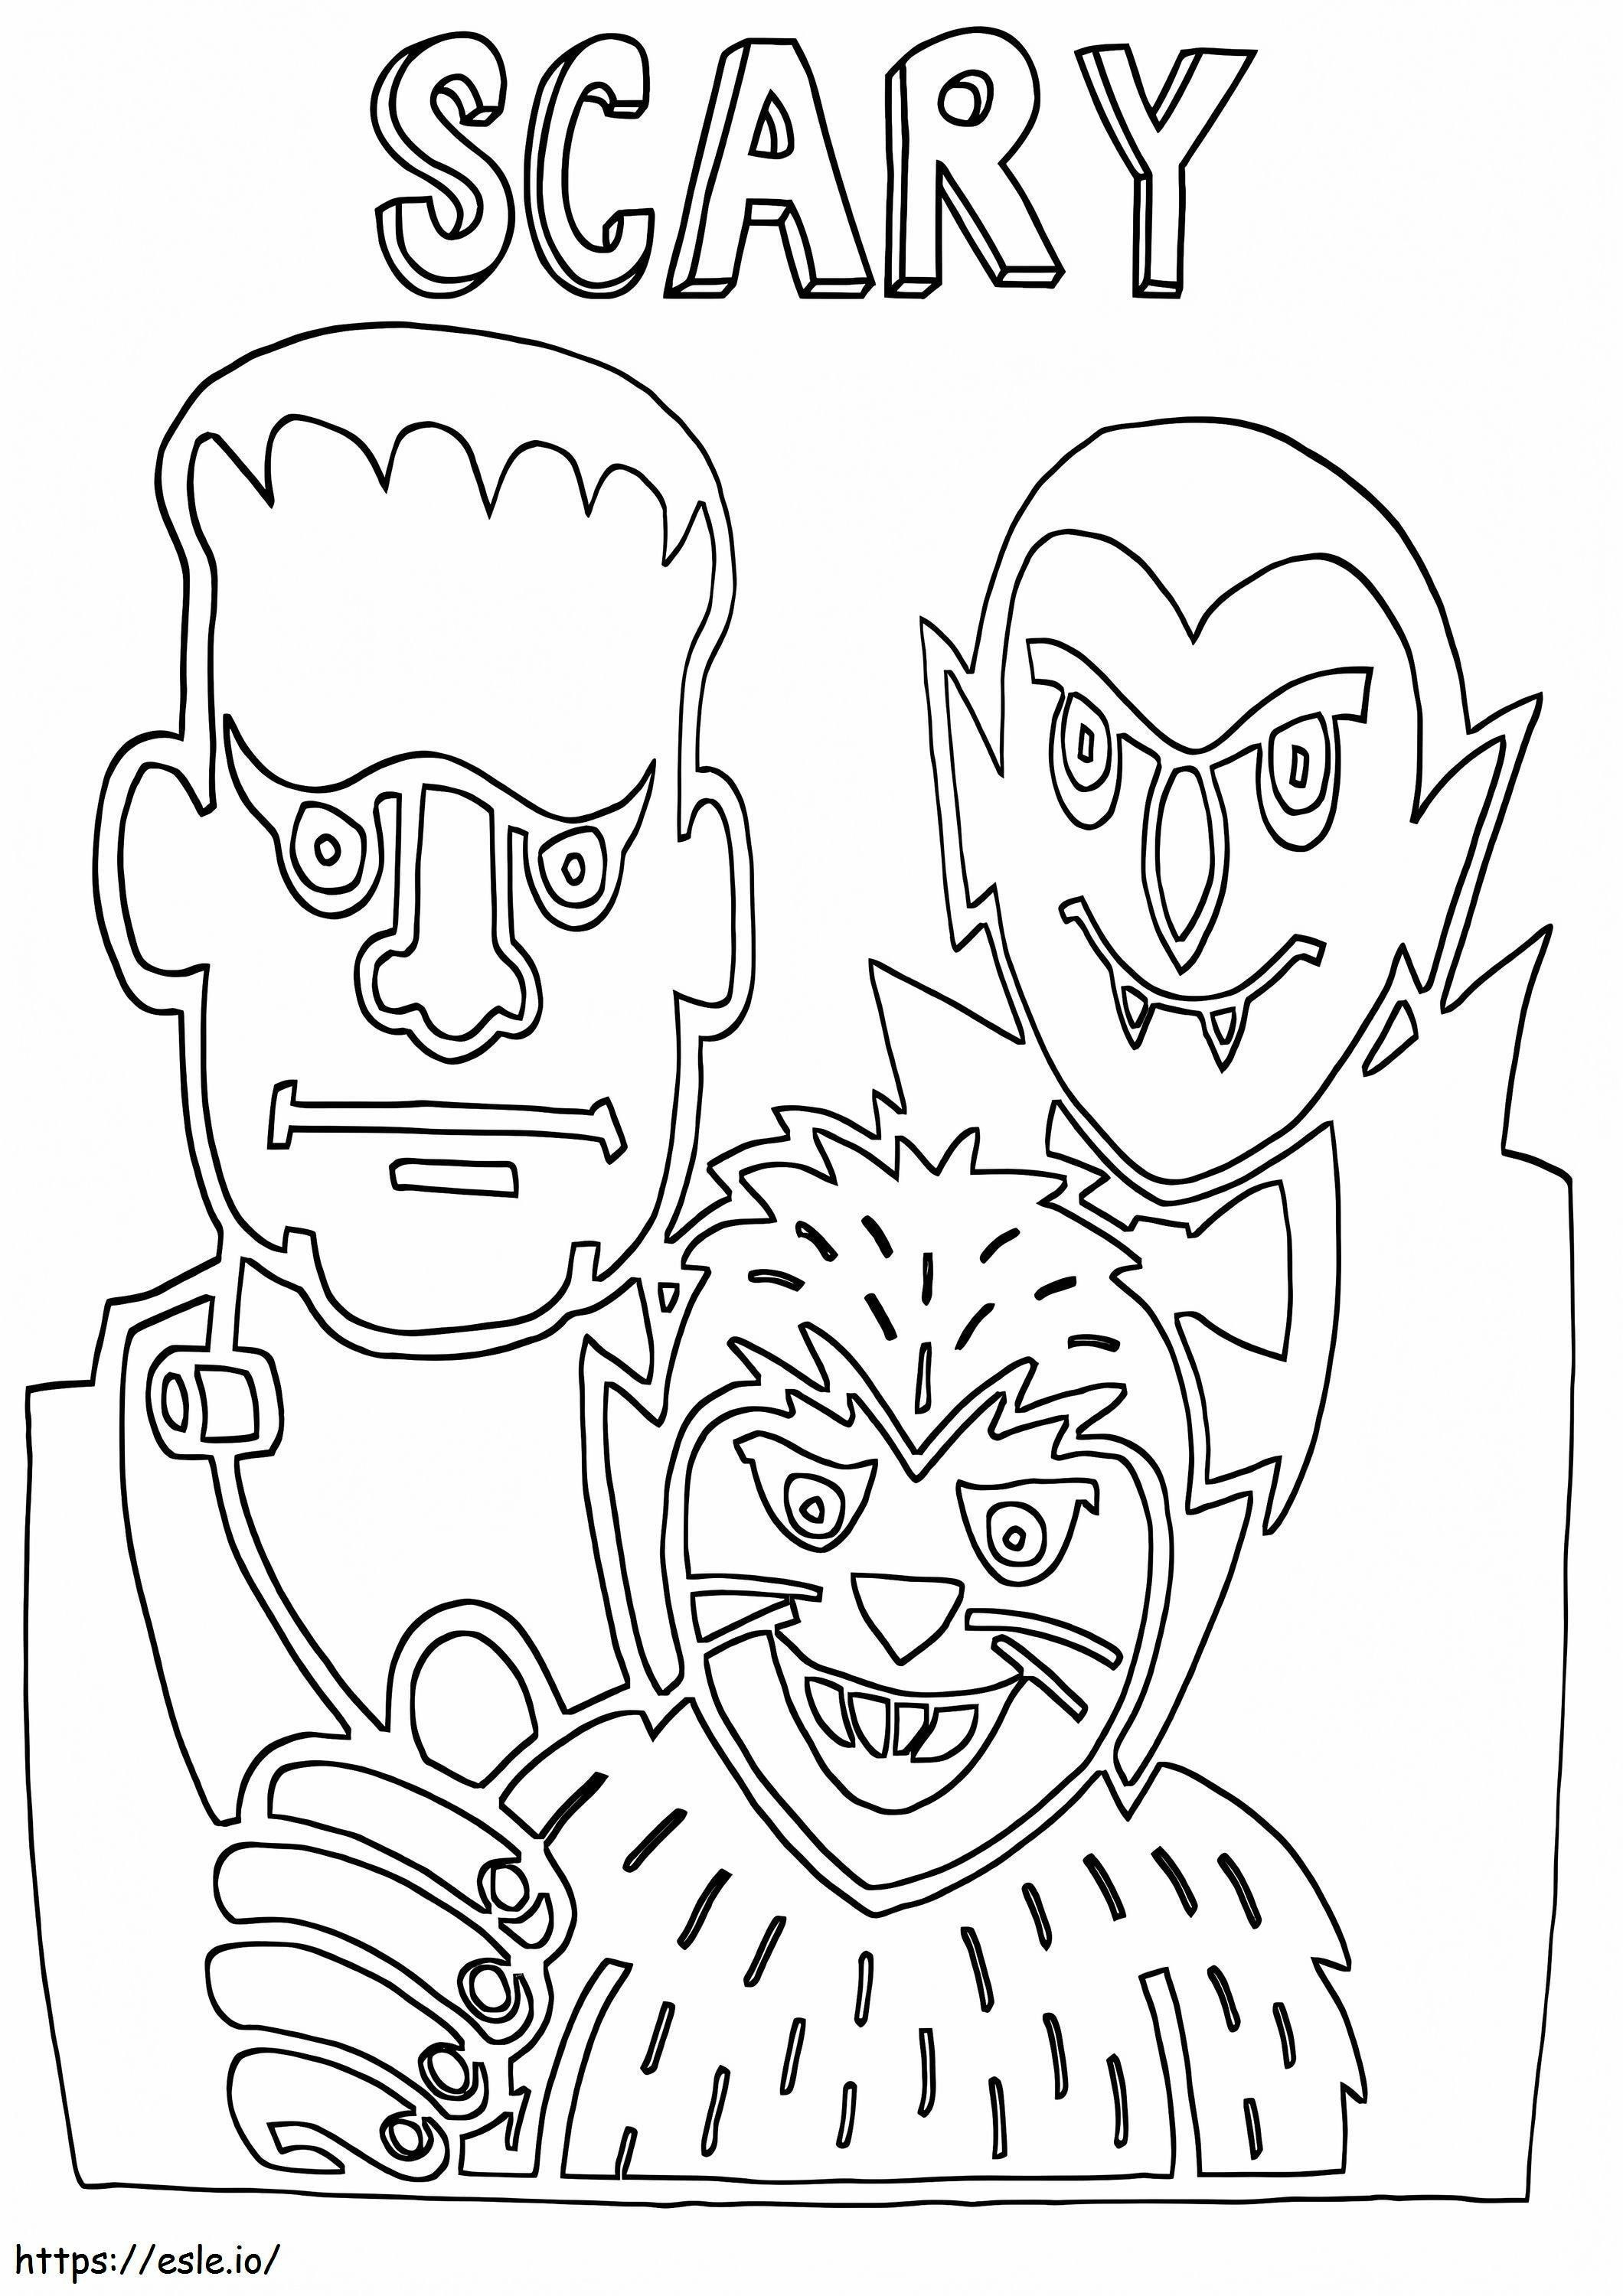 Scary 3 coloring page